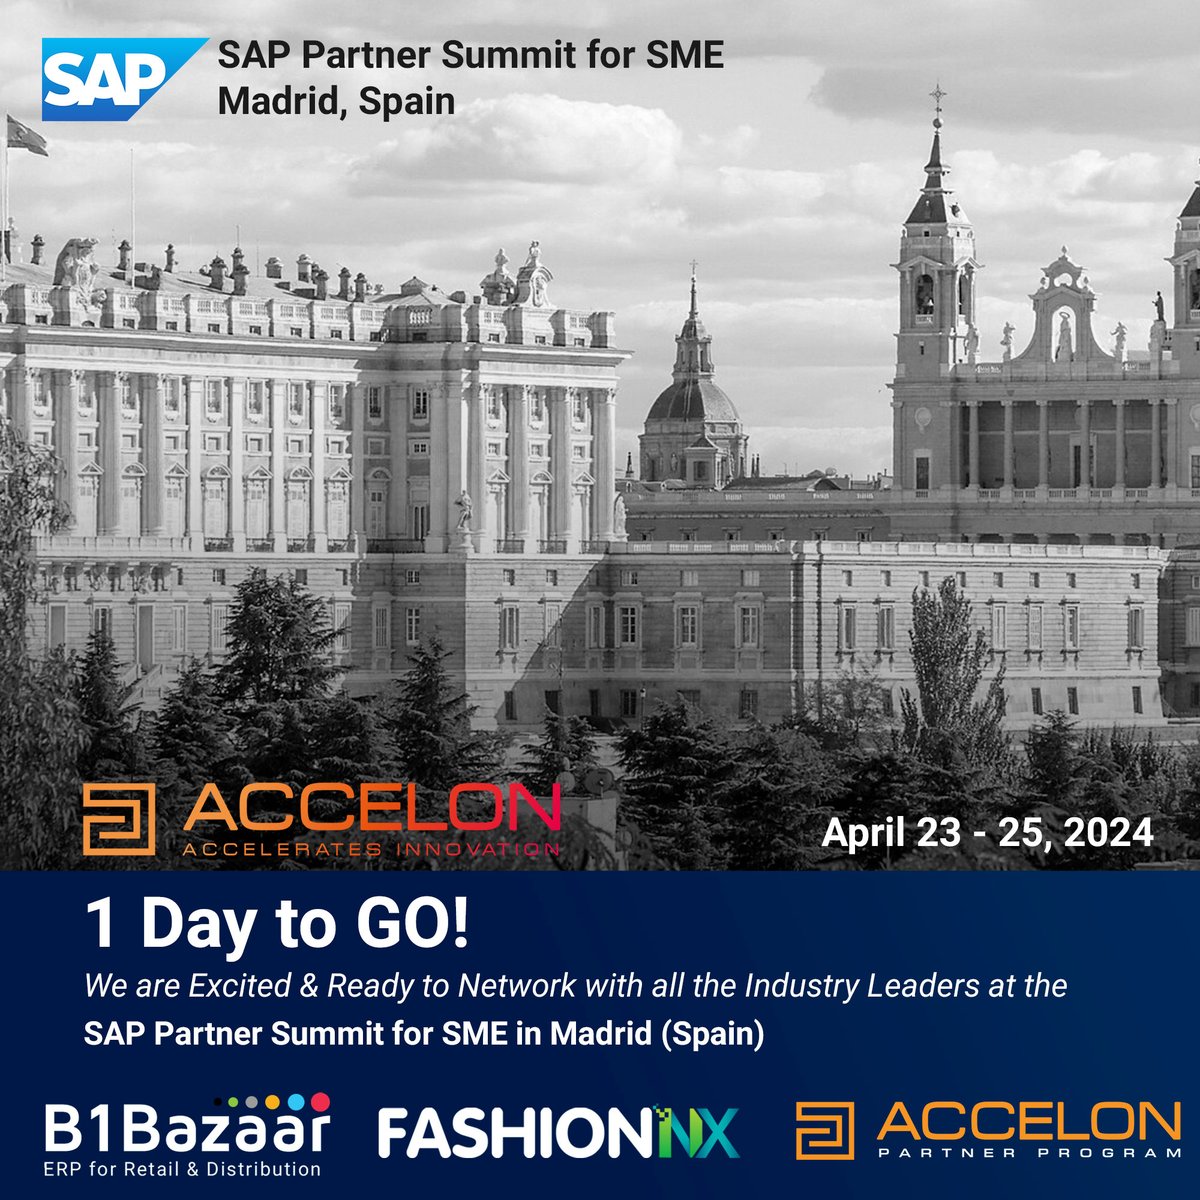 Hello SAP Partners!

Accelon is ready to receive you at the SAP Partner Summit for SME

Join us explore our comprehensive solutions for Retail, Wholesale Distribution, Apparel Accessories Manufacturing
#SAPPartnerSummit #SAP #SME #SAPPartnerSummit #SAPPartner  #SAPBusinessOne